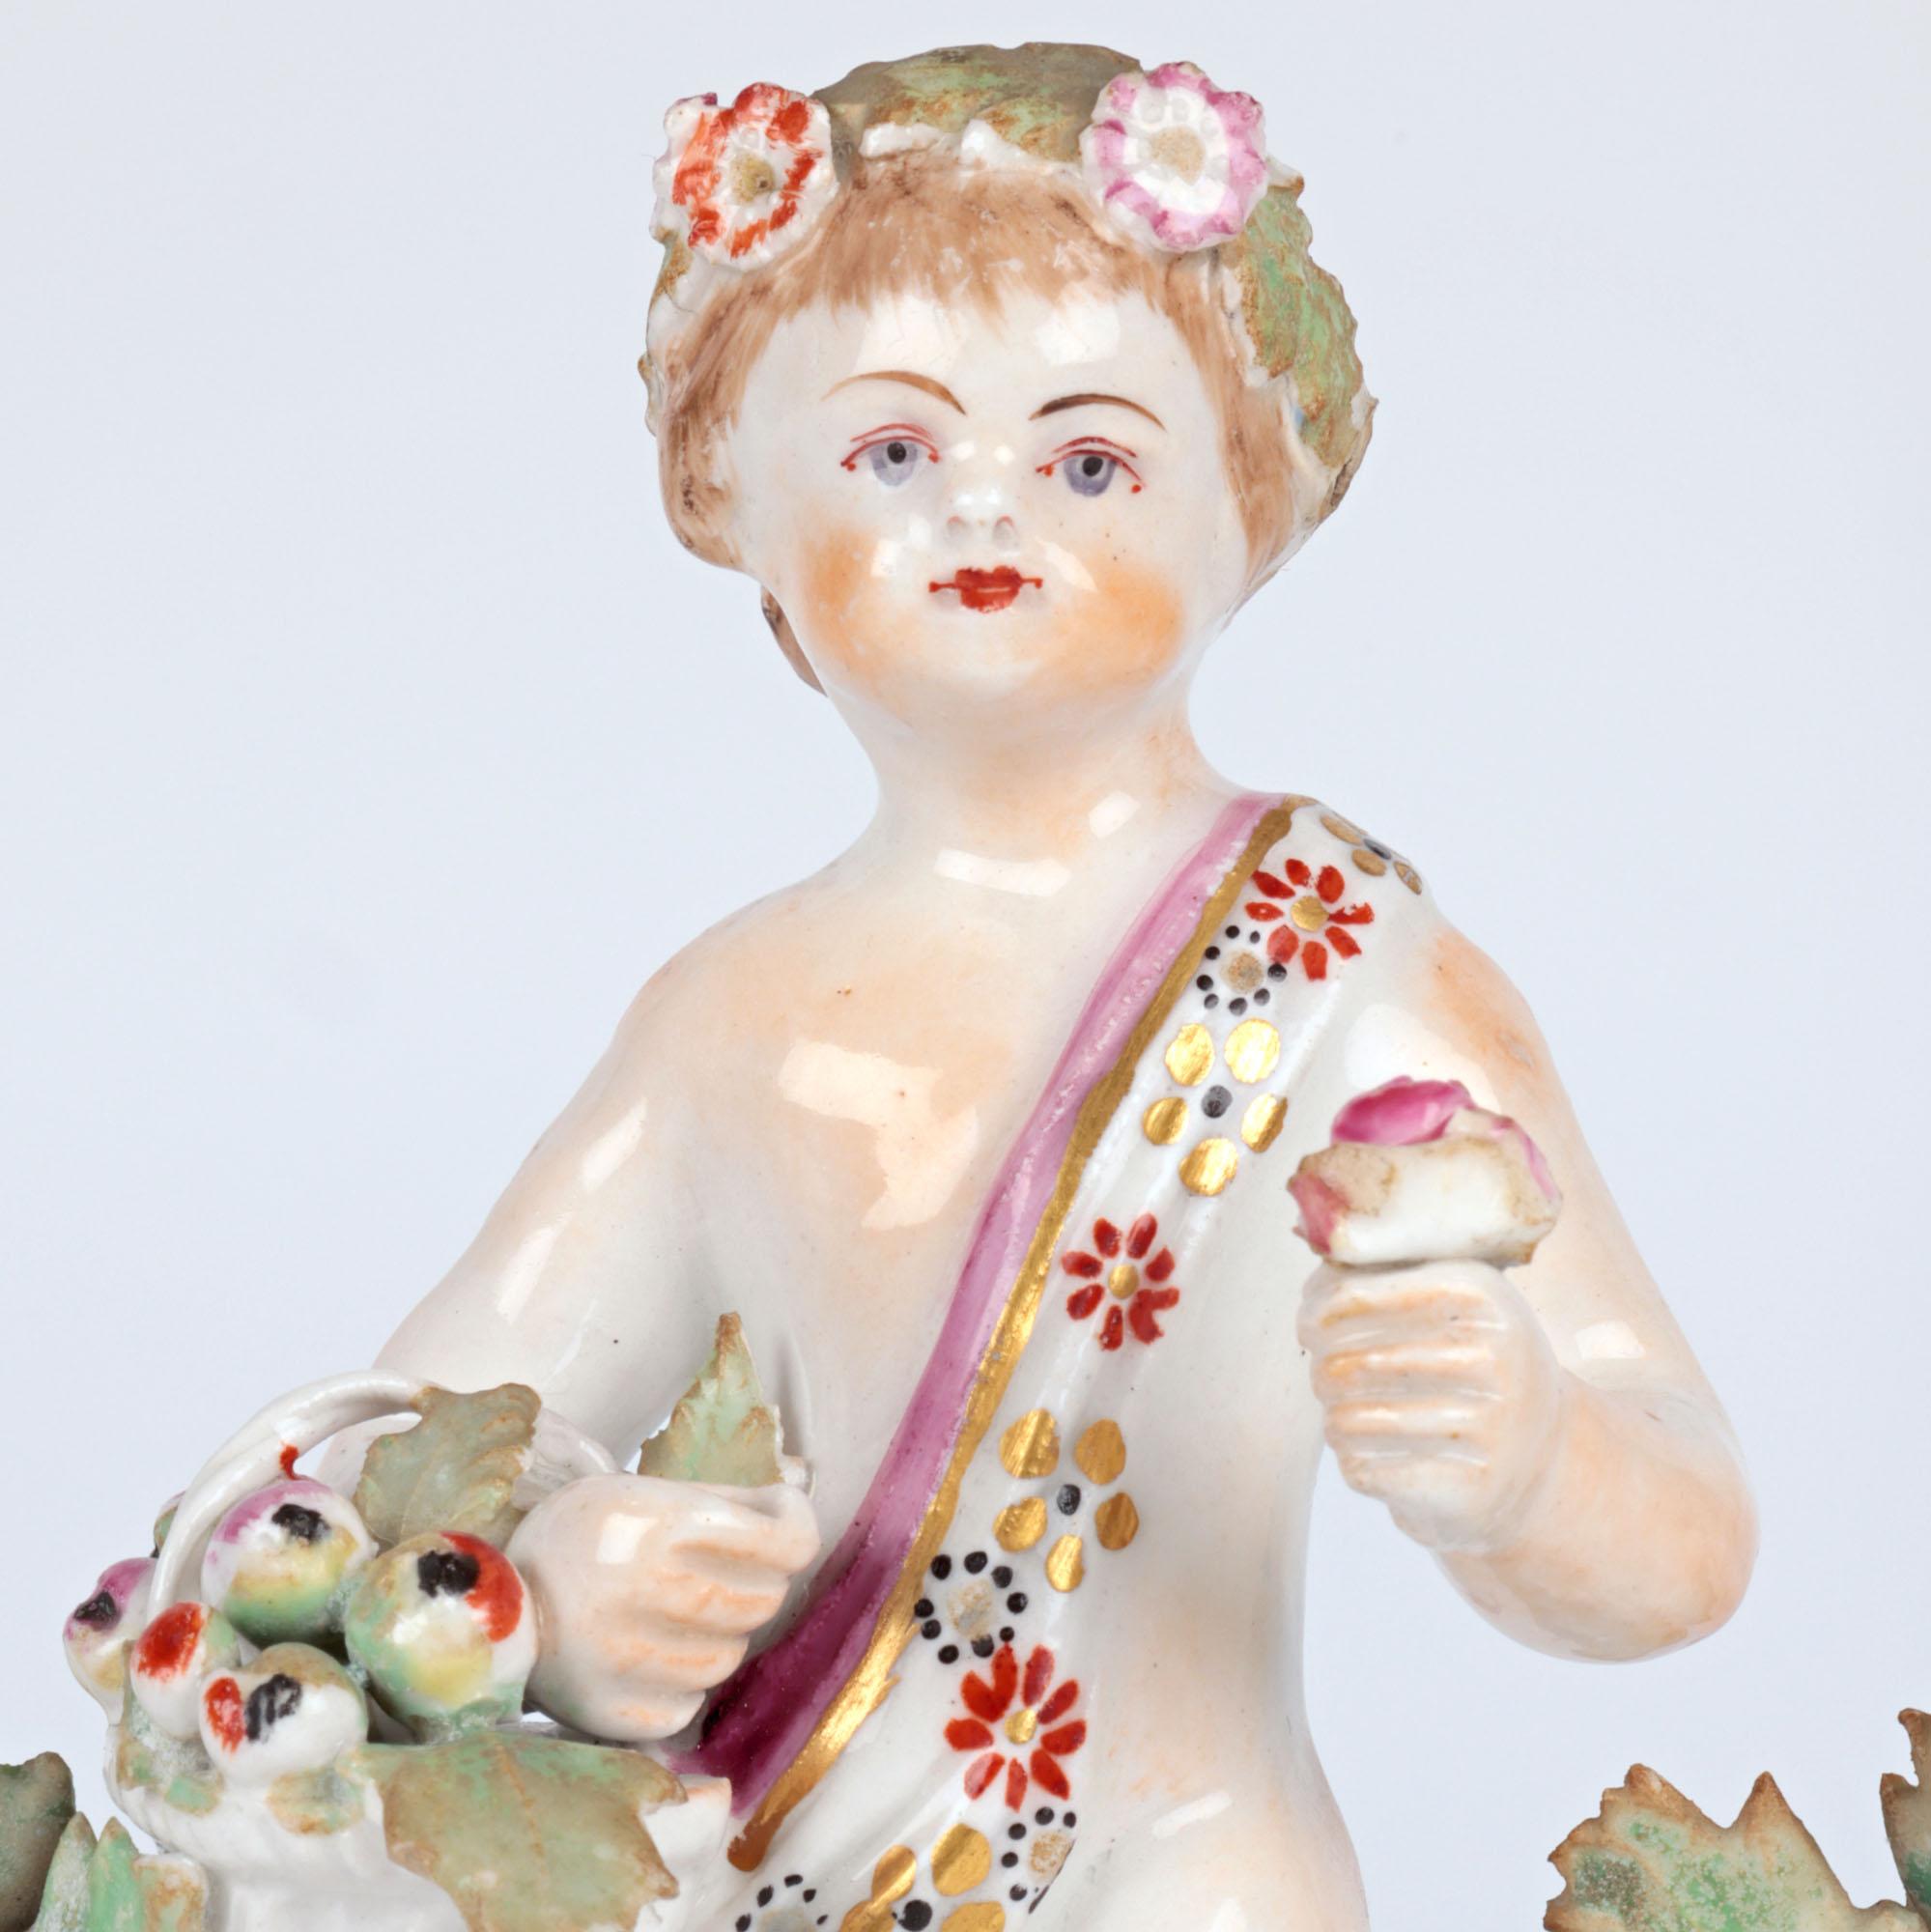 A scarce antique English porcelain figure of a Putto holding a basket of flowers by the renowned Staffordshire factory Bow and dating from around 1760. The Putto stands raised on an open scroll work base on five legs with the base adorned with